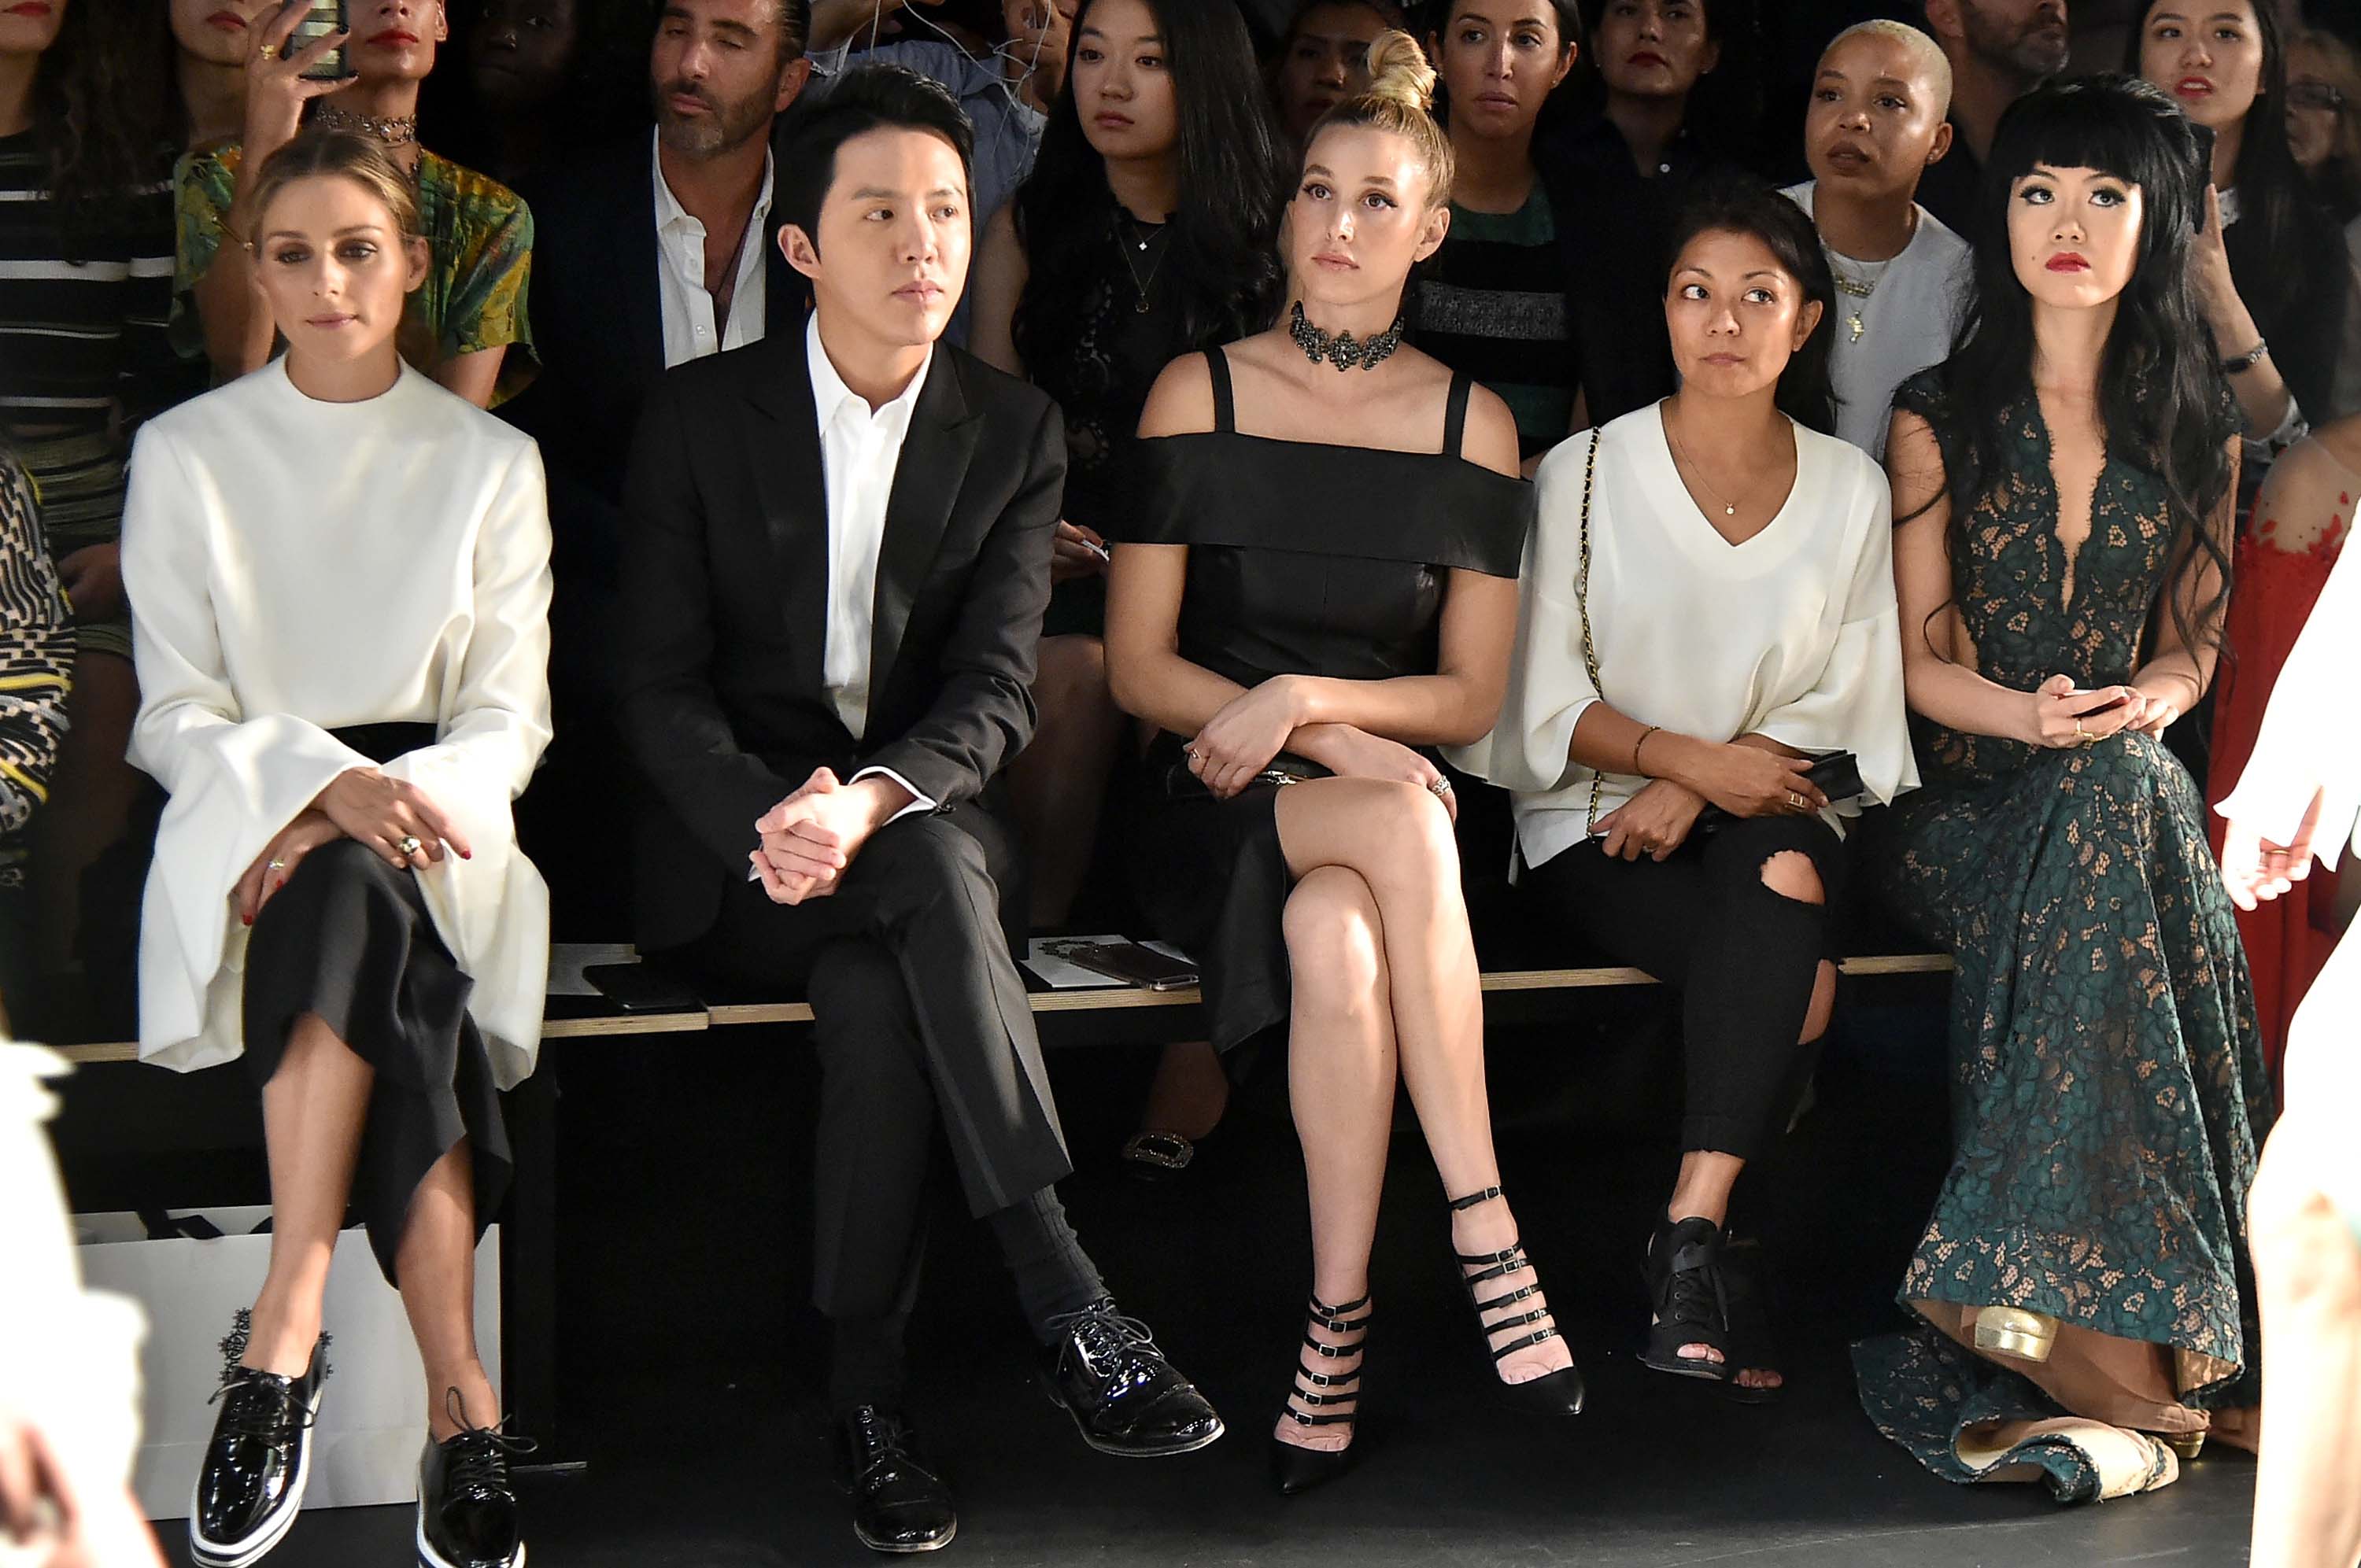 Whitney Port attends the Lanyu fashion show